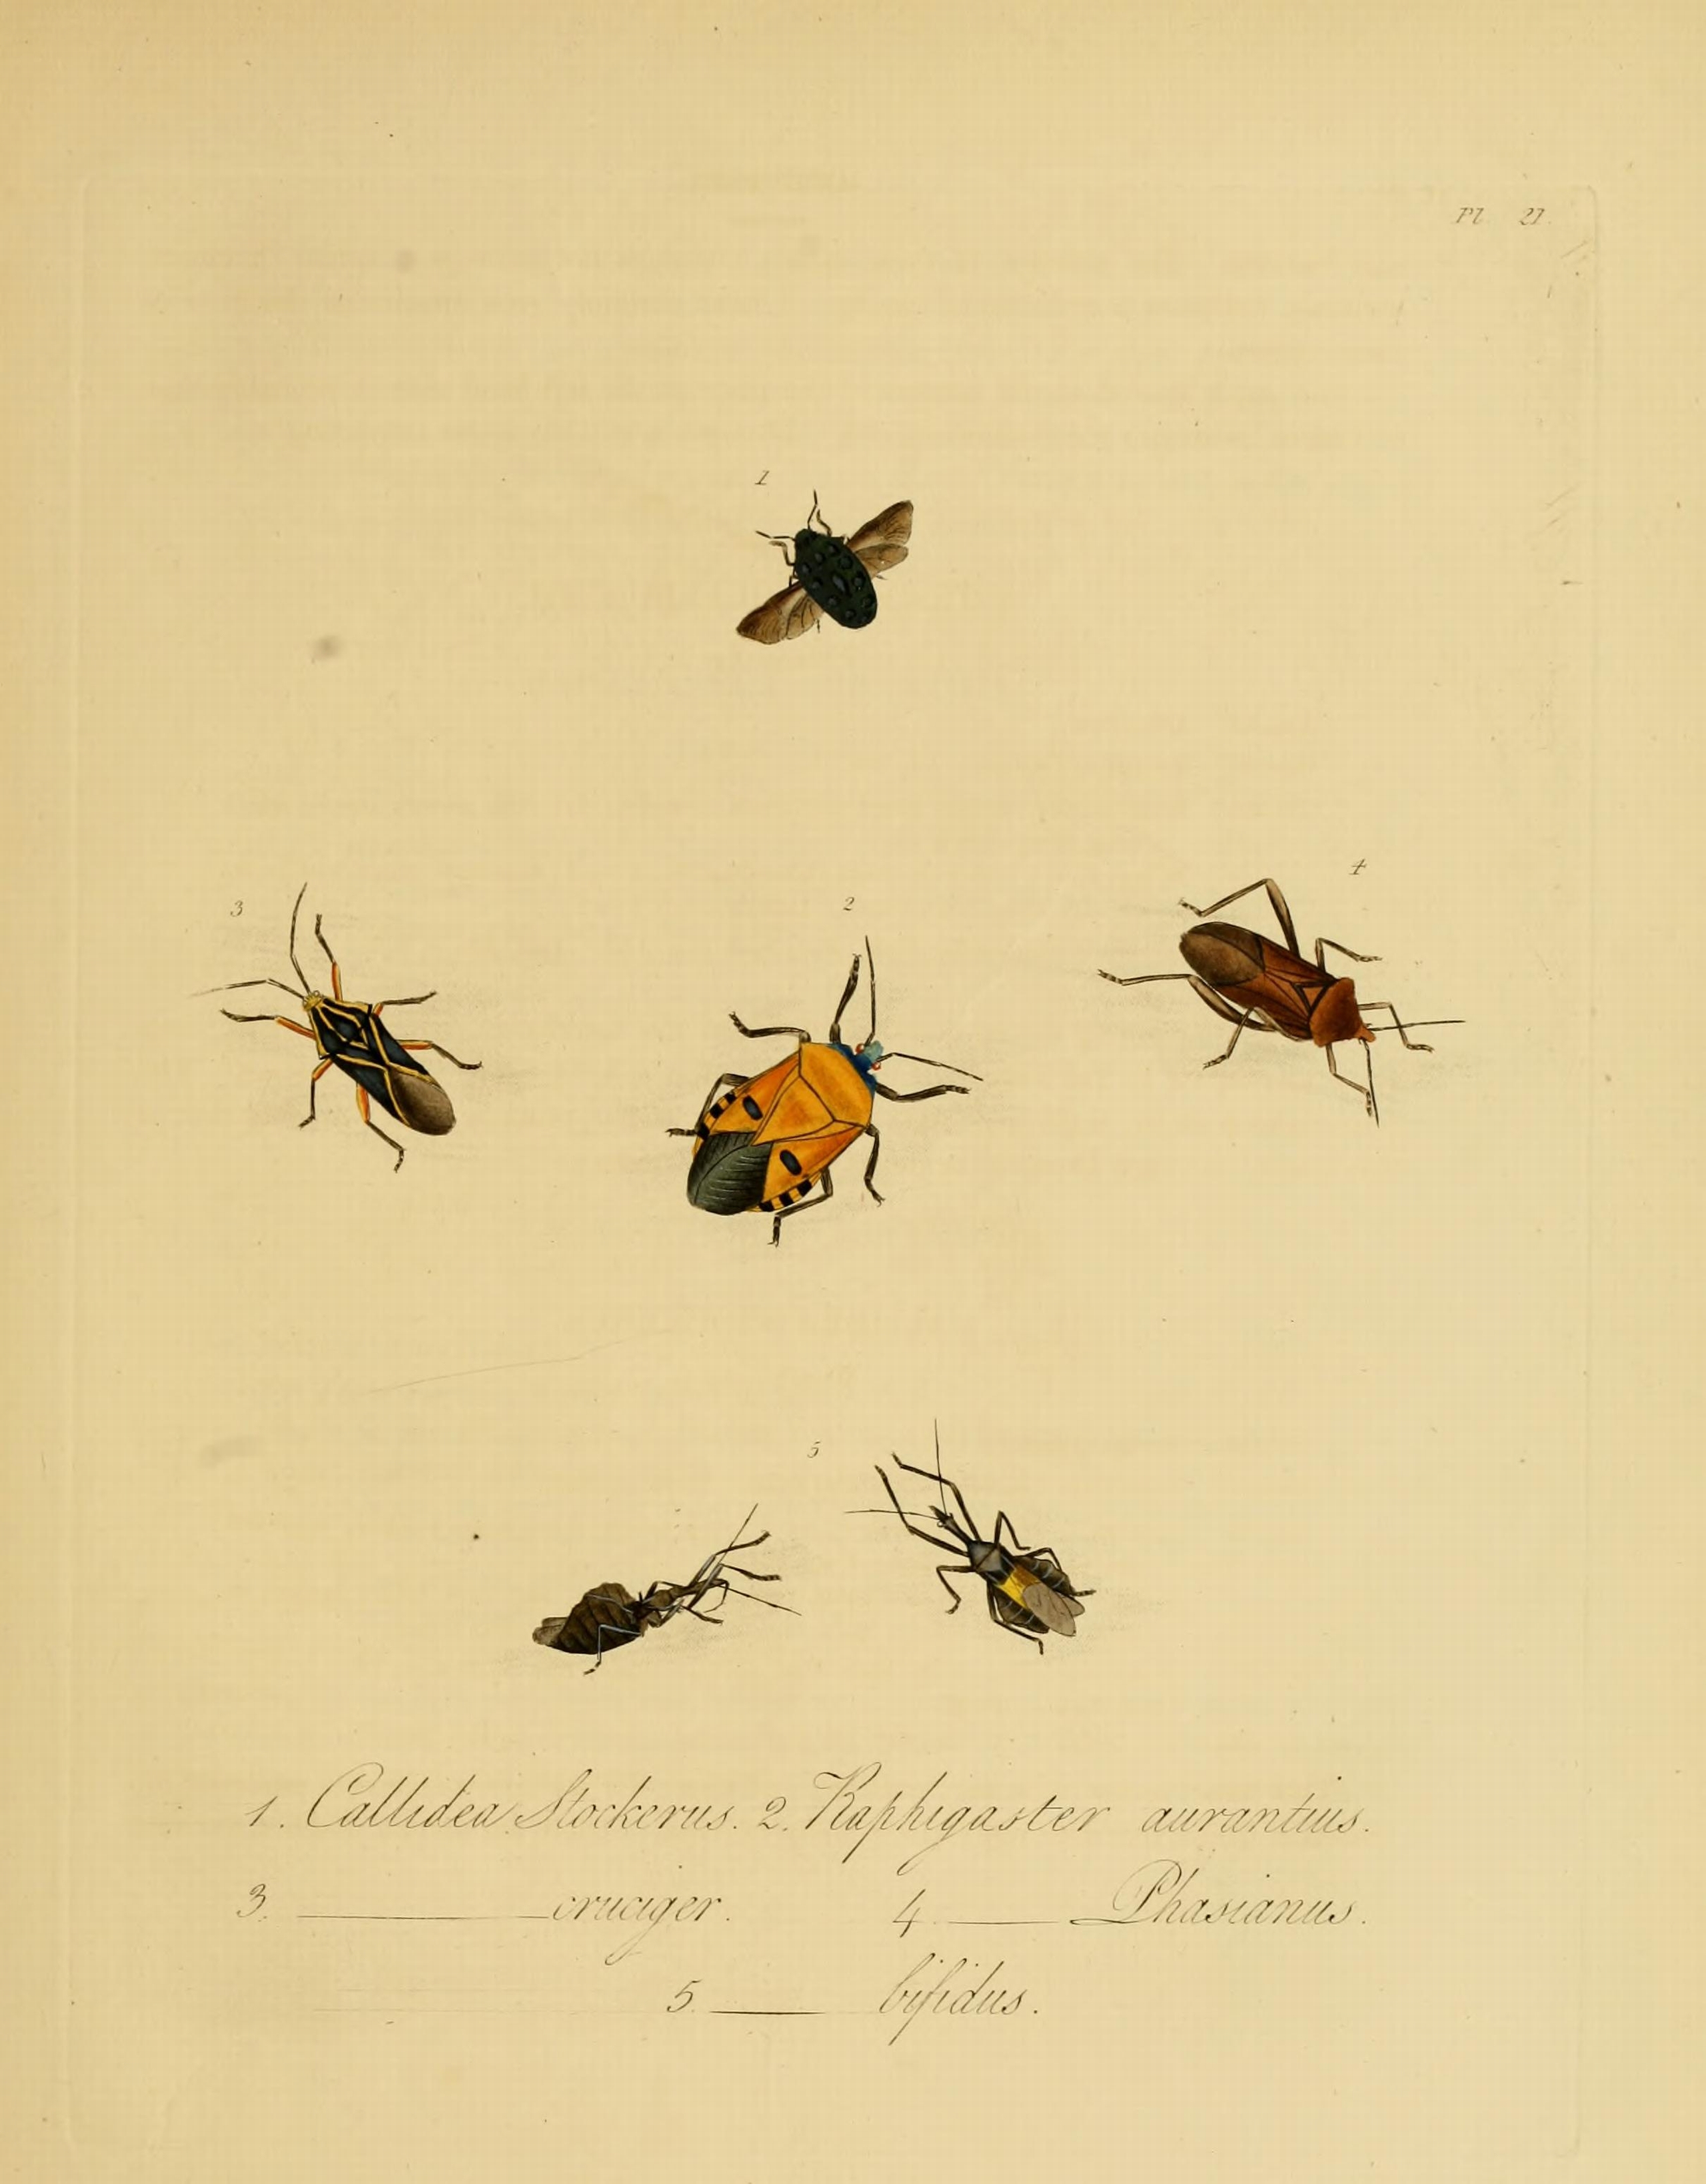 Donovan - Insects of China, 1838 - pl 21